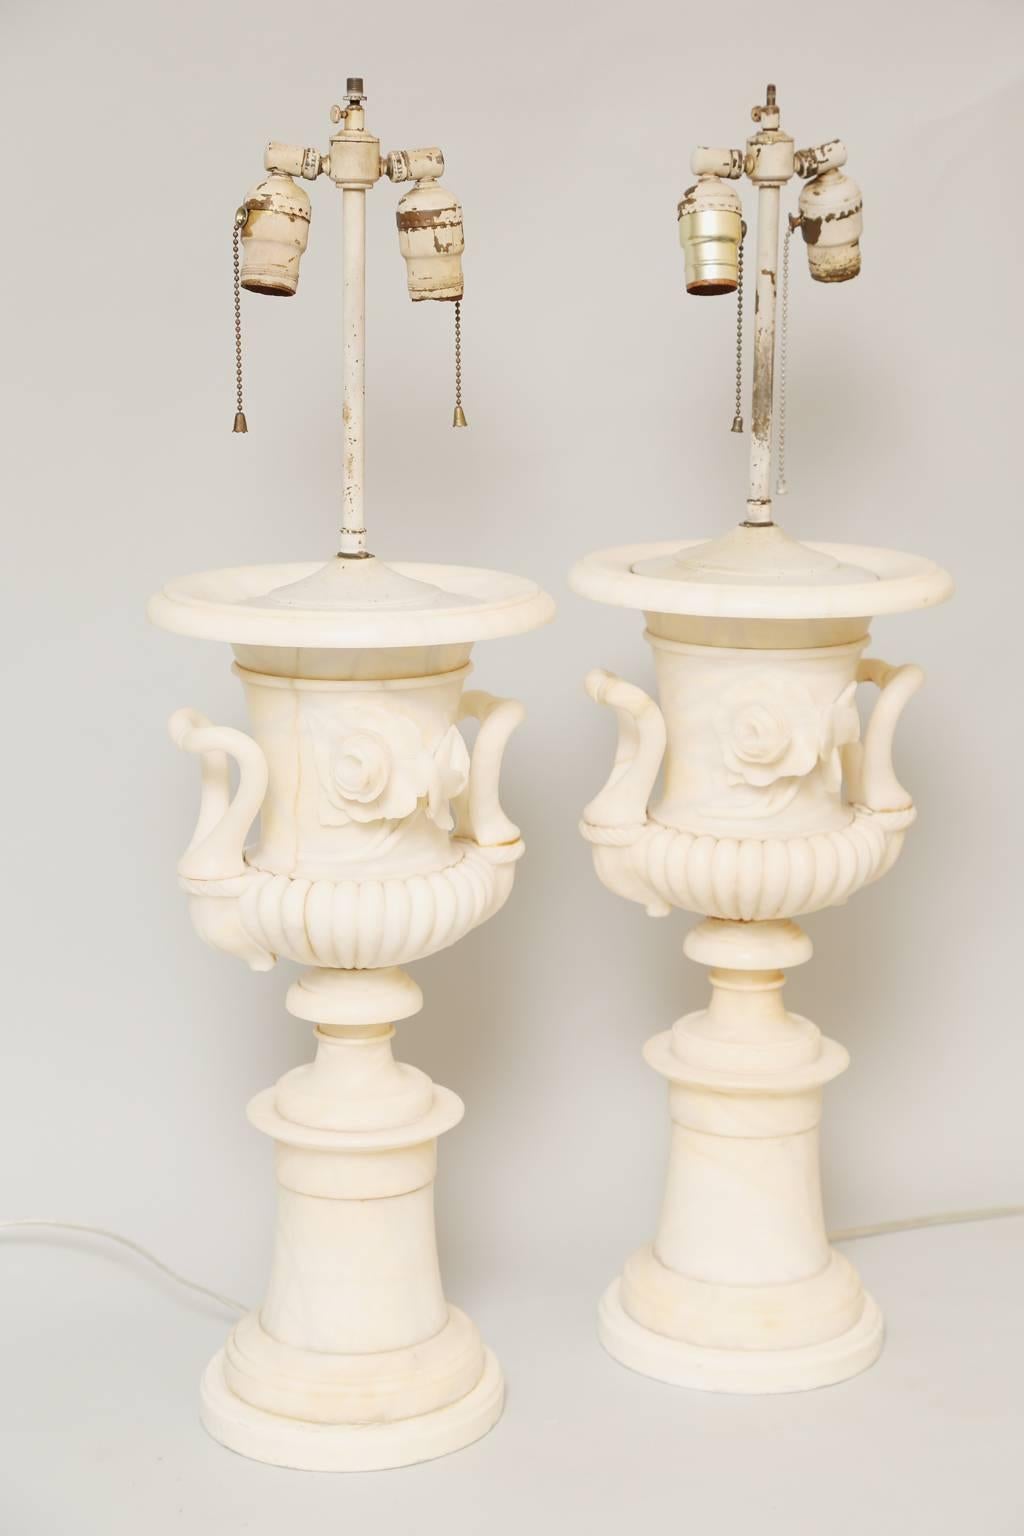 Pair of table lamps, of carved alabaster, each a campana form urn, its body outcarved with blossoms, flanked by curved handles, on fluted socle, raised on round footed base, set upon graduated cylindrical plinth.

Stock id: D1248.